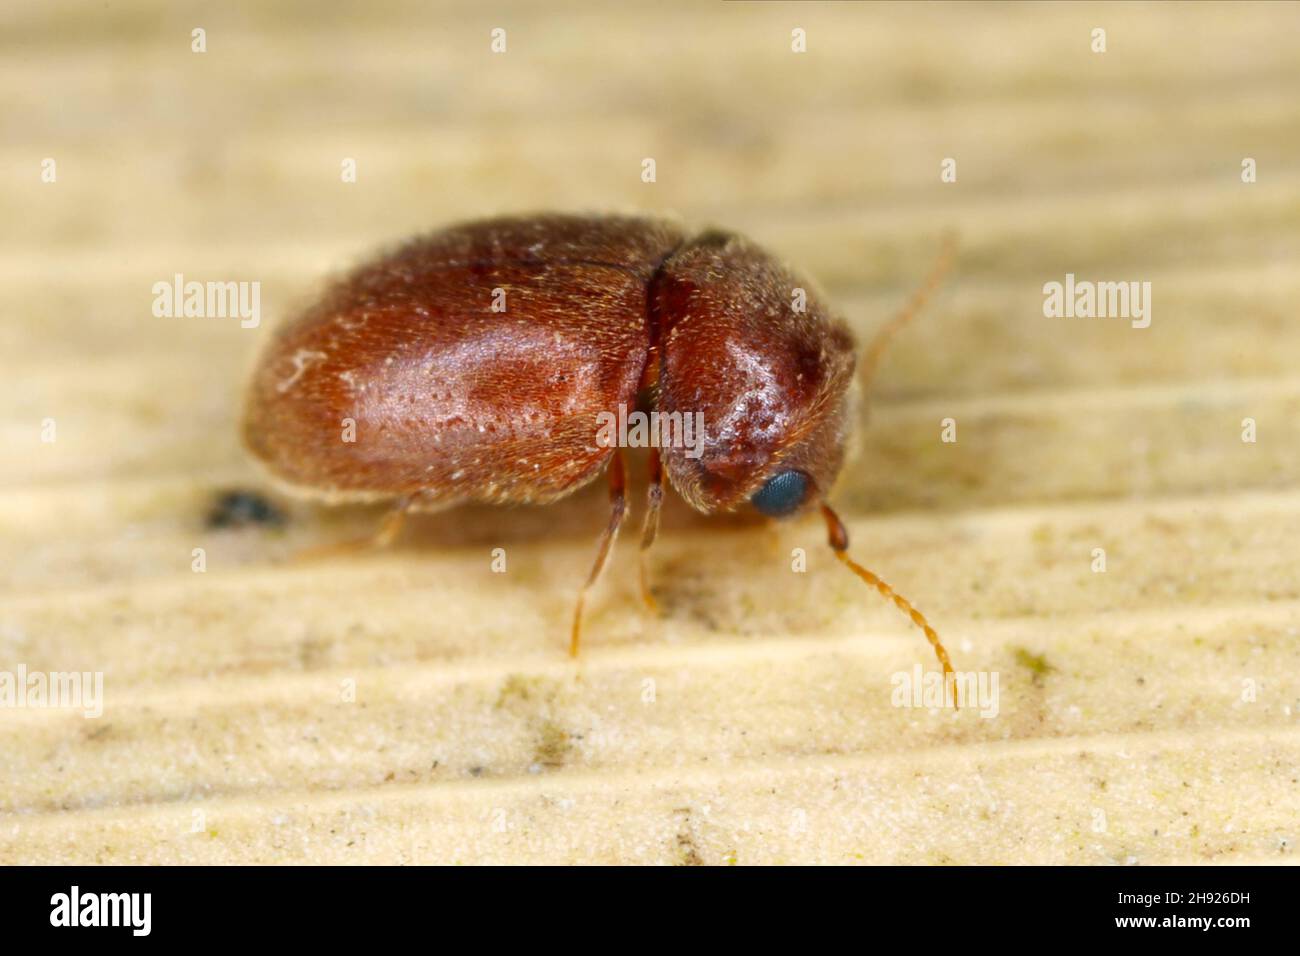 Lasioderma serricorne commonly known as the cigarette beetle, cigar beetle, or tobacco beetle is pest of tobacco dried herbs and many of others stored Stock Photo